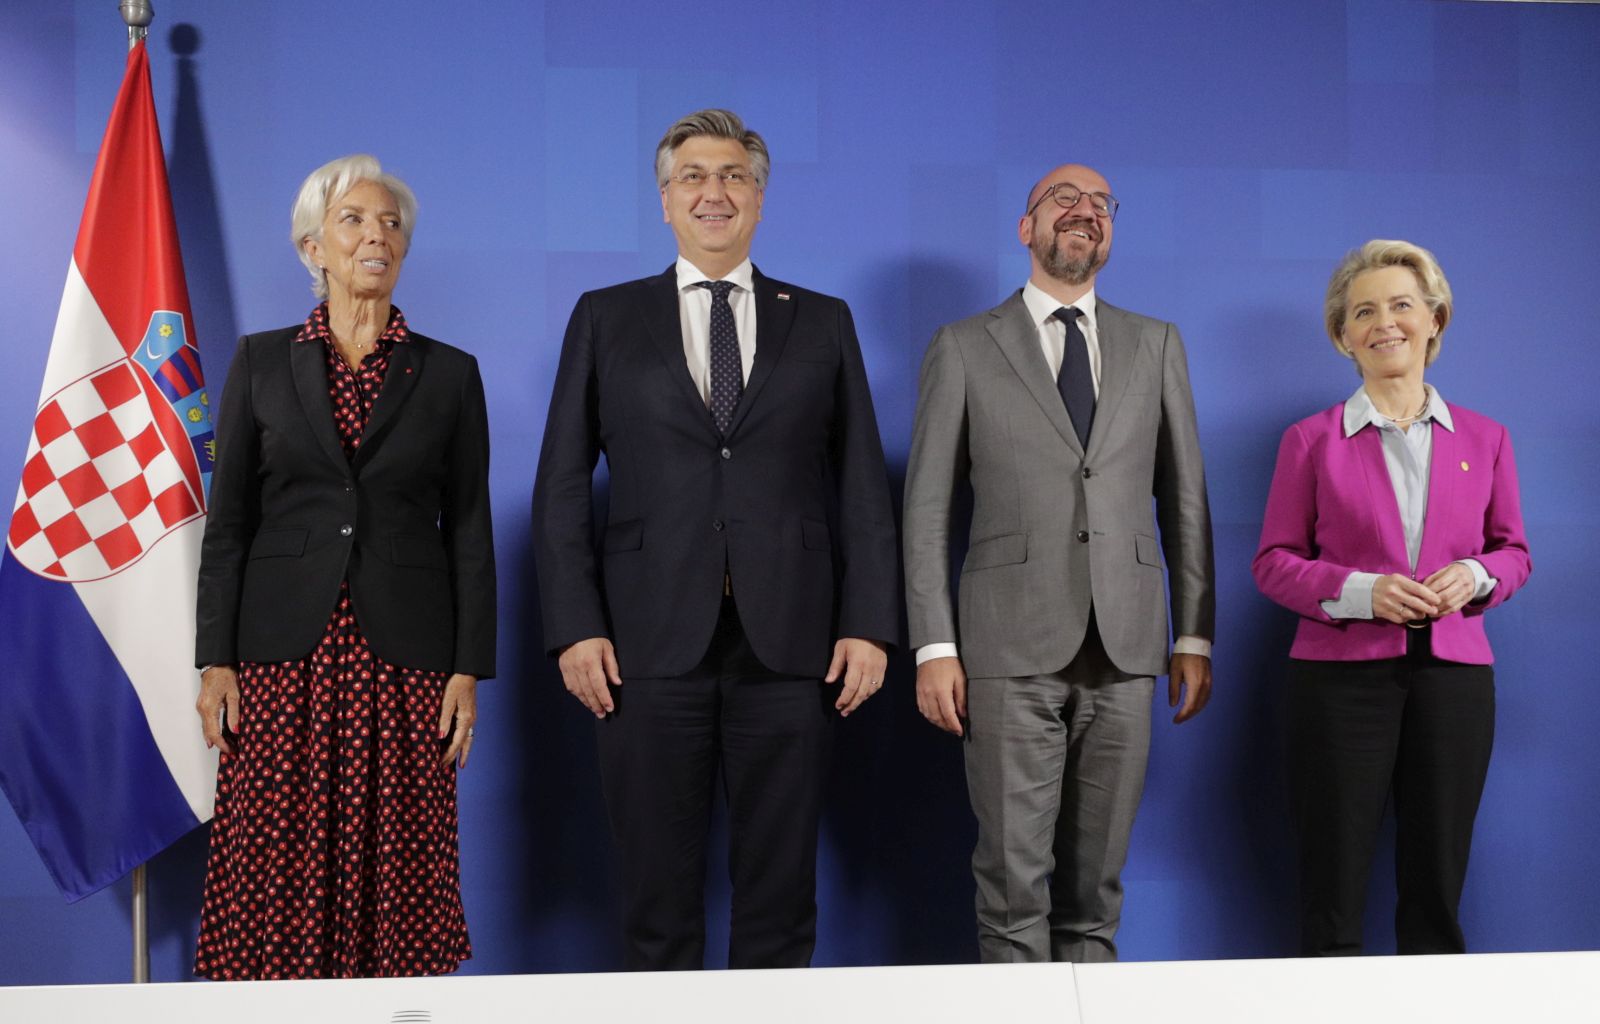 epa10031767 (L-R) Christine Lagarde, president of the European Central Bank (ECB), Croatian Prime Minister Andrej Plenkovic, European Council President Charles Michel, European Commission President Ursula von der Leyen and President of the Eurogroup Irish finance minister Pachal Donohoe pose for a family picture as Croatia will join the eurozone in 2023, on the second day of EU Summit in Brussels, Belgium, 24 June 2022. The latest developments concerning cost-of-living, raging inflation and energy war waged by Russia are topping the agenda when EU member states leaders meet for a European Council meeting.  EPA/OLIVIER HOSLET / POOL